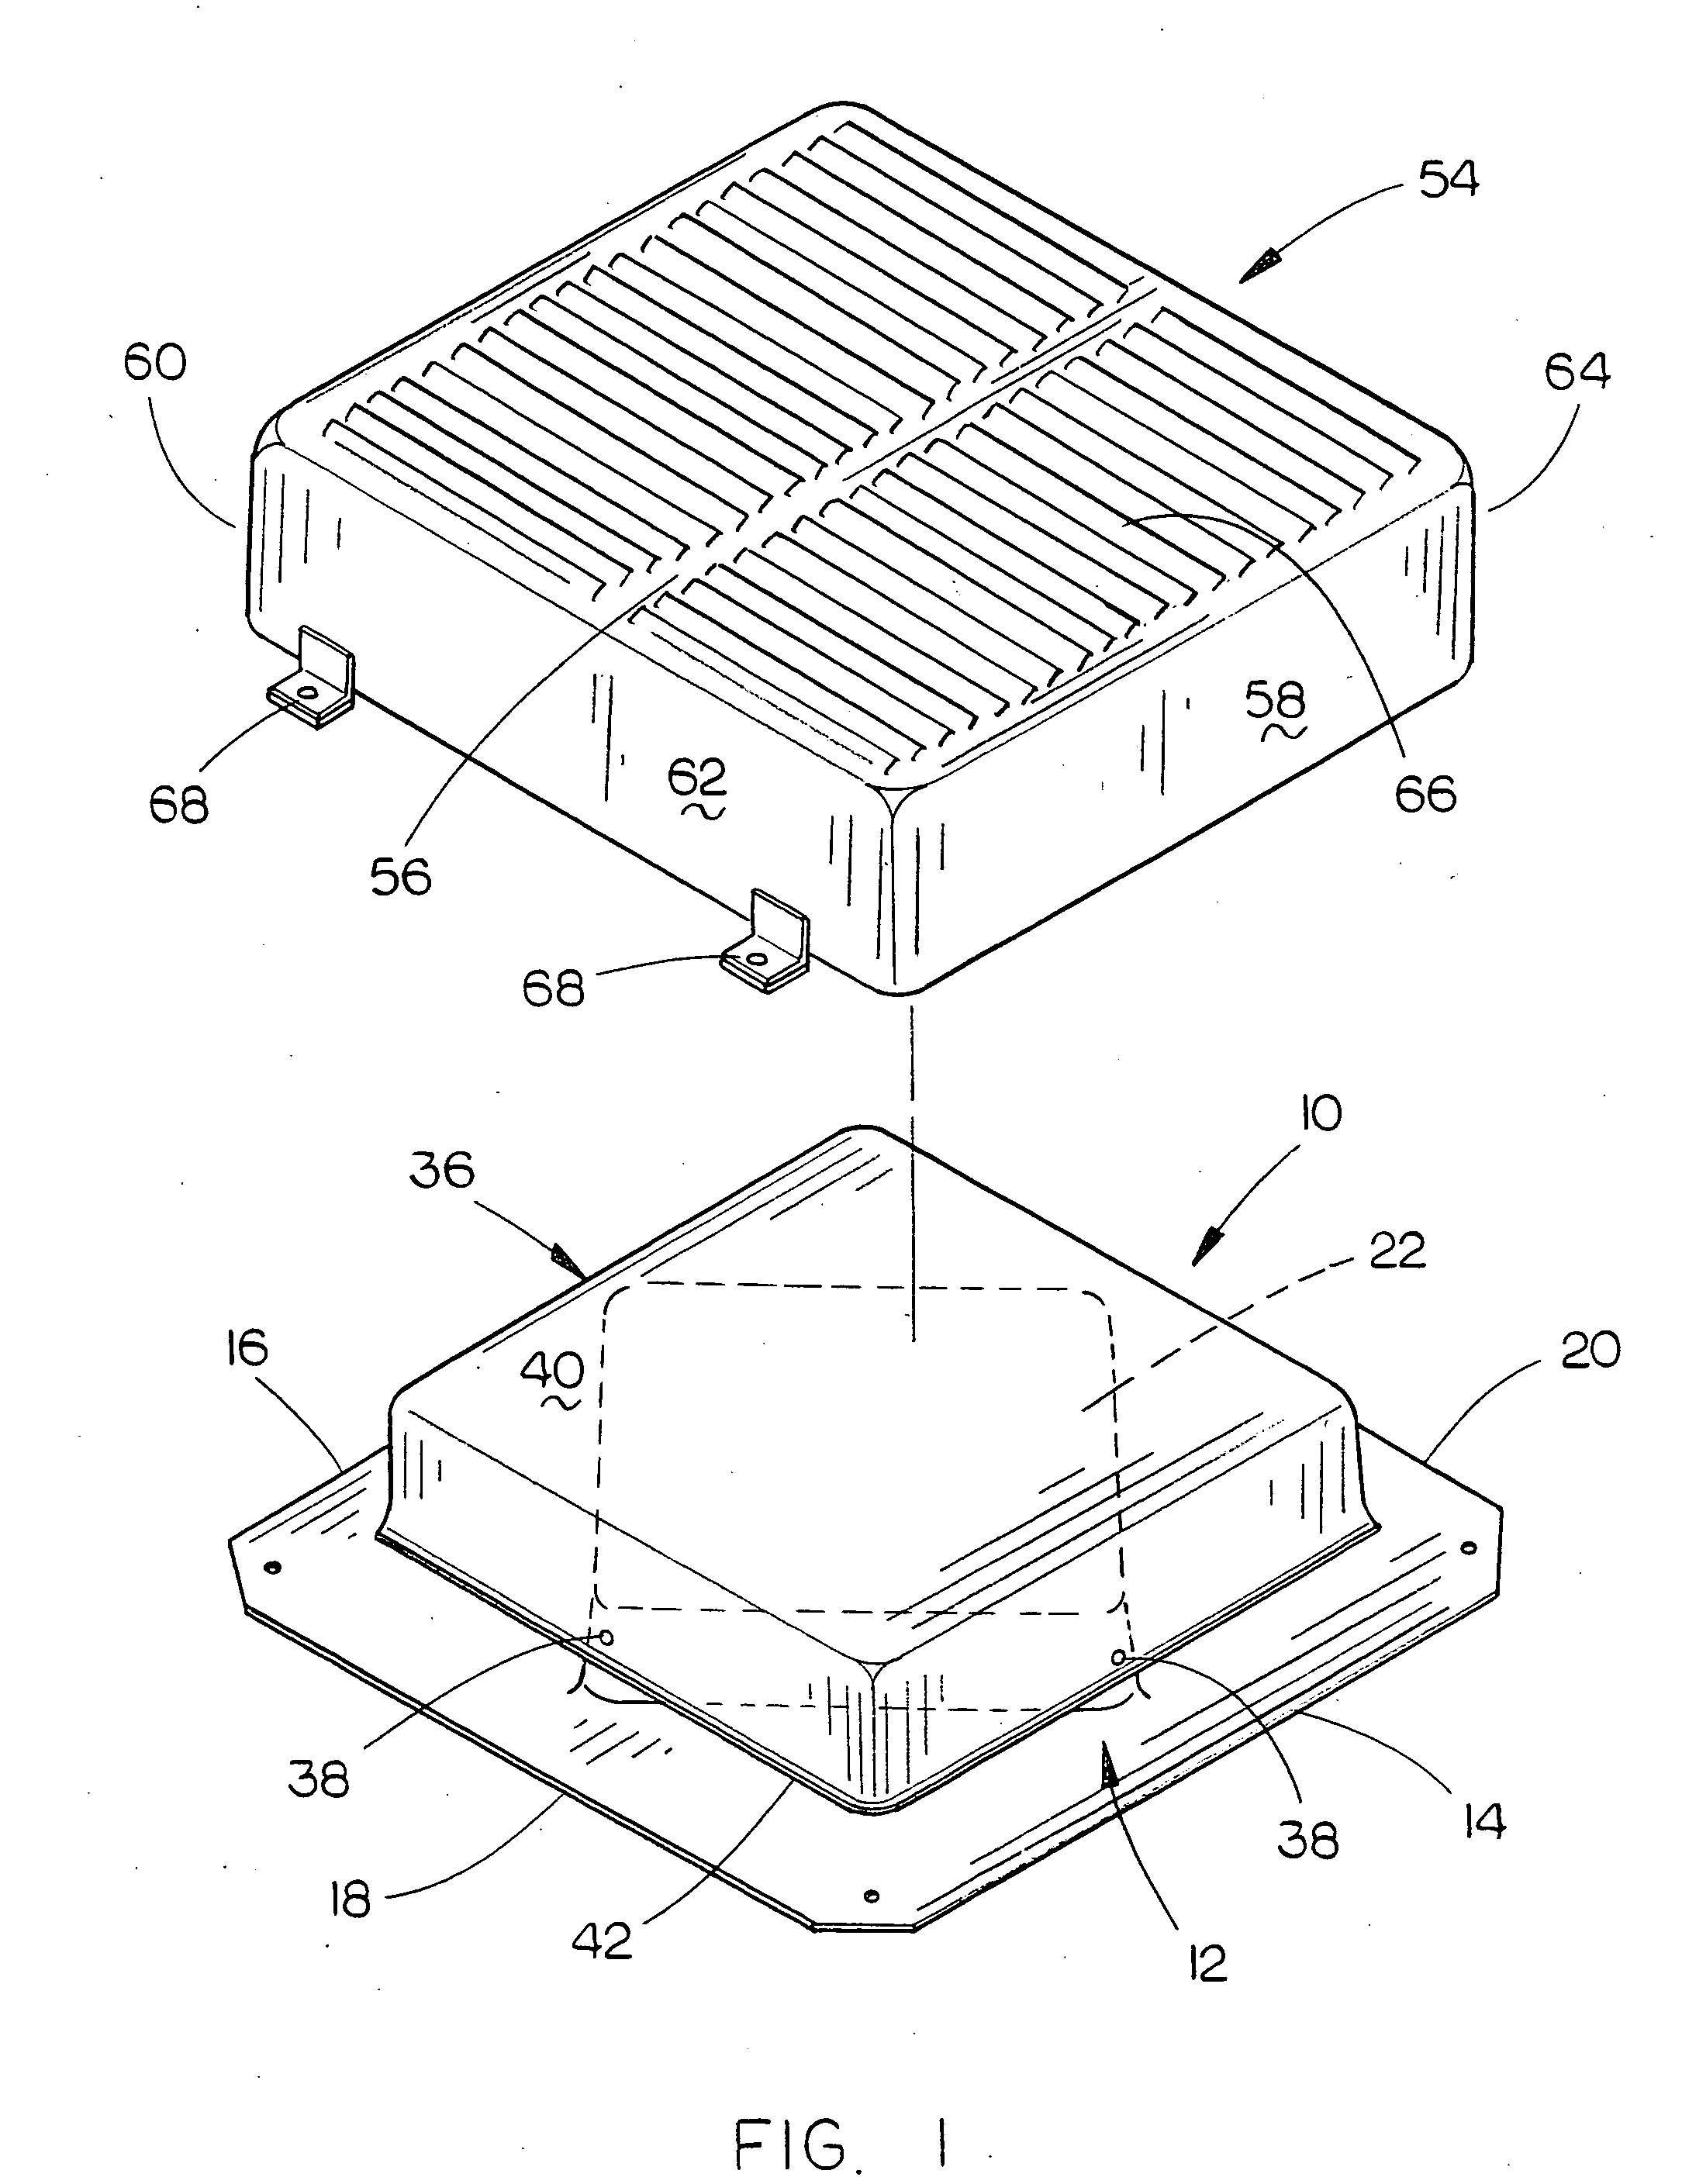 Cover for a static roof vent